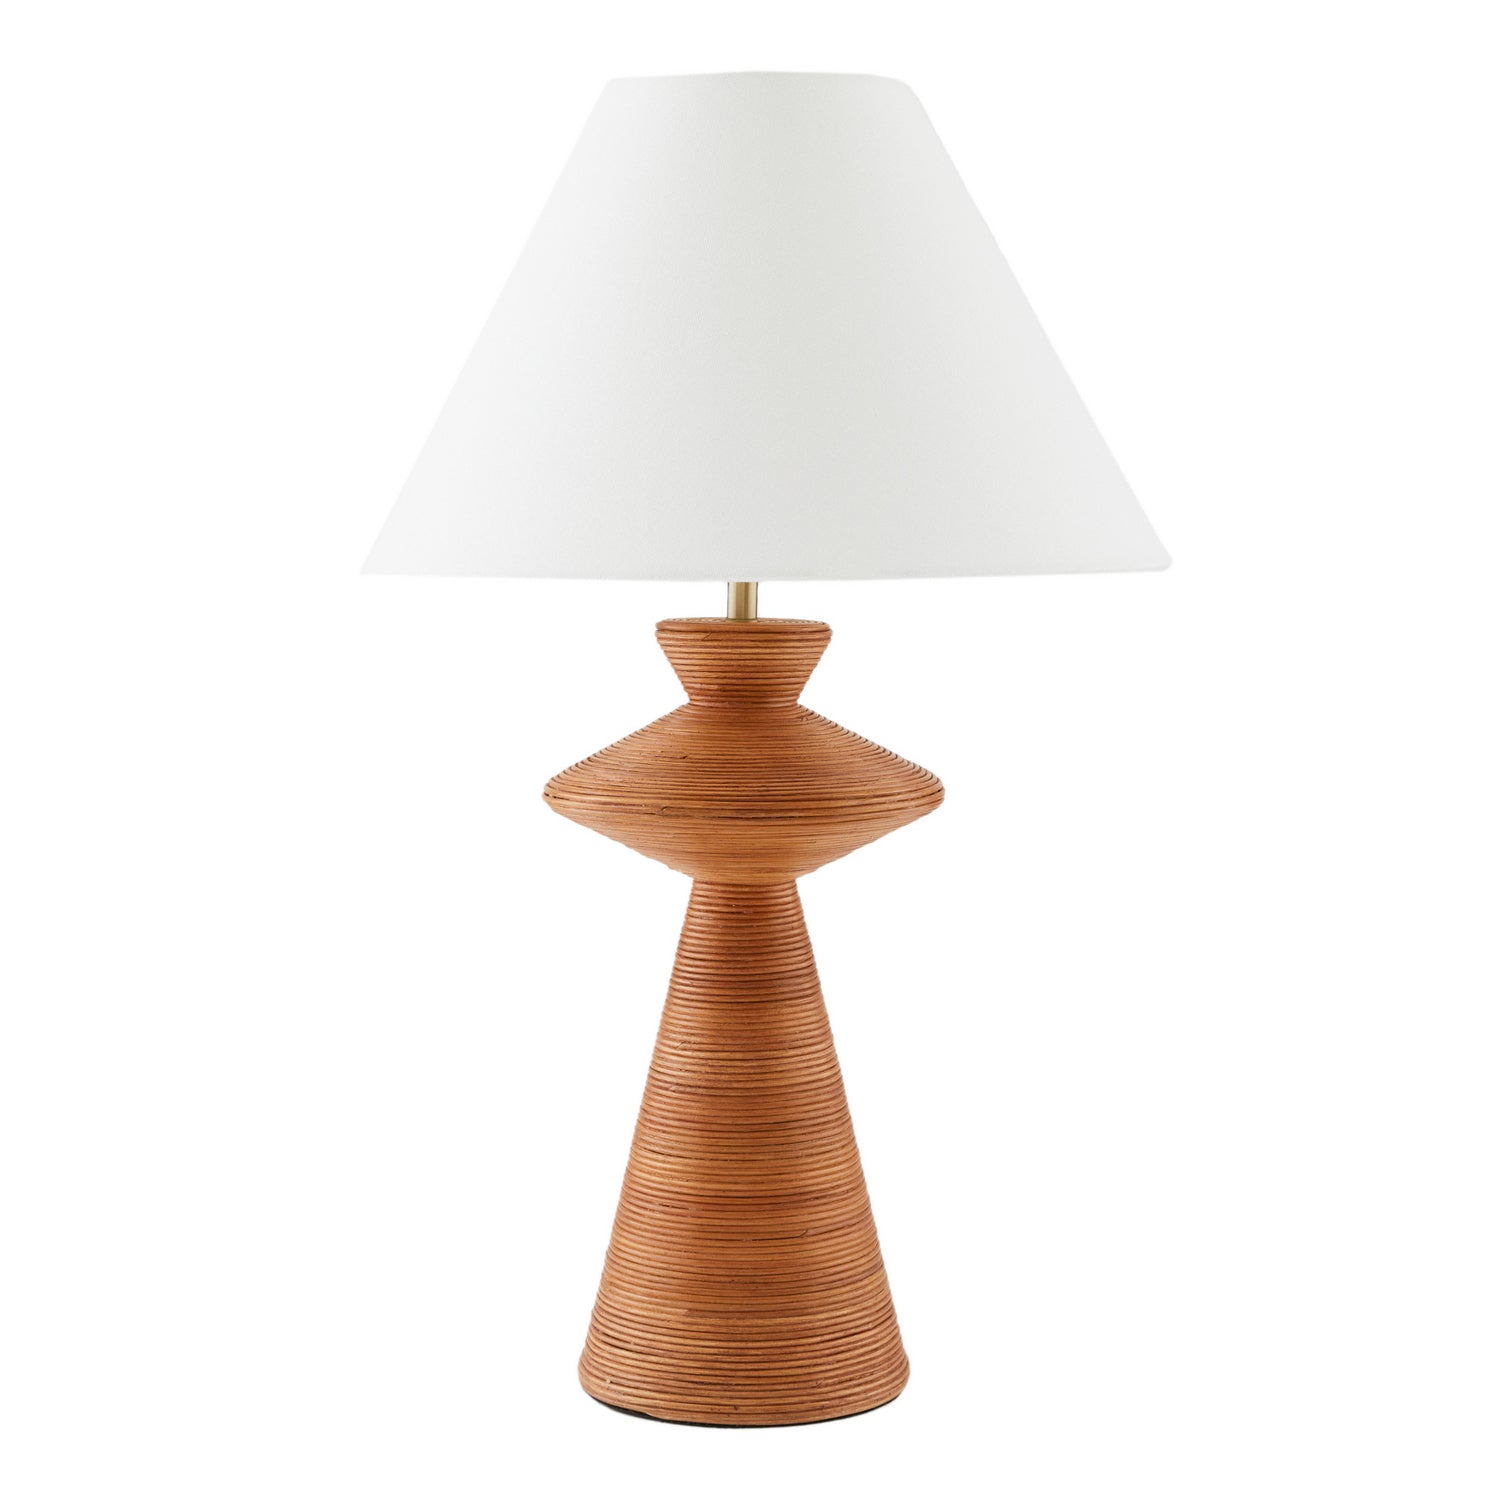 One Light Table Lamp from the Palista collection in Honey finish